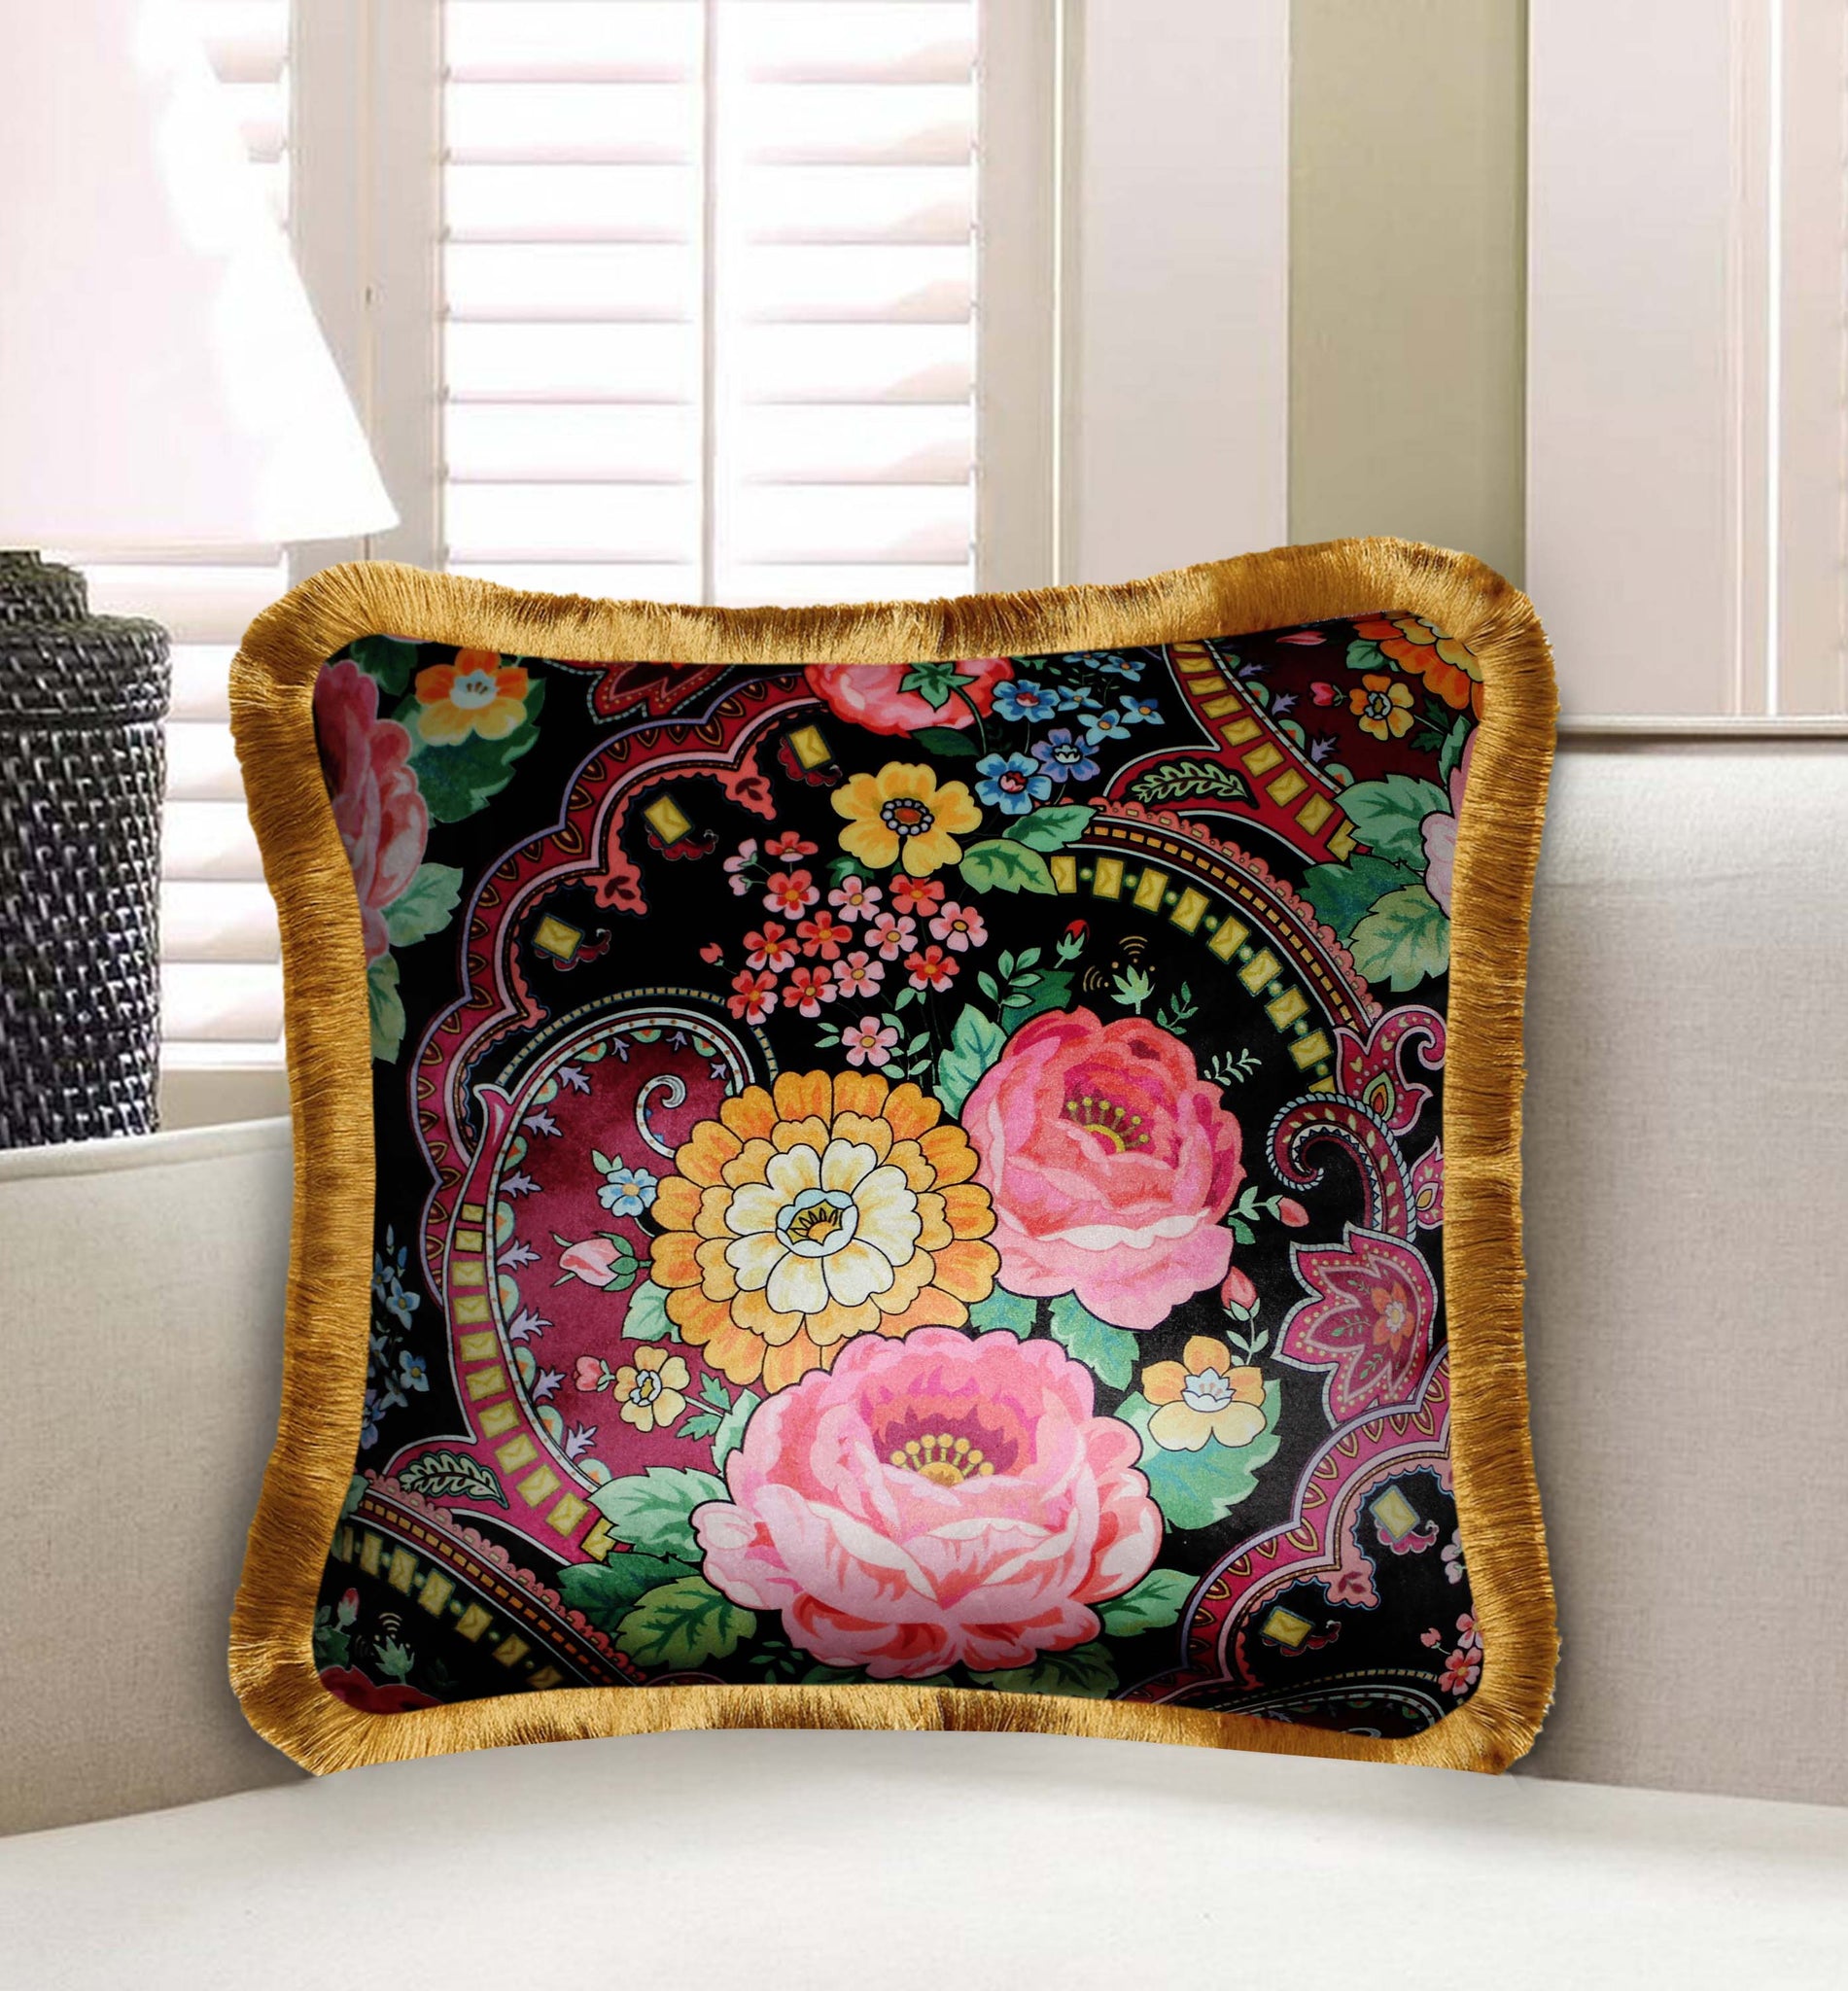  Velvet Cushion Cover Exotic Flower Decorative pillowcase Floral Décor Throw Pillow for Sofa Chair Bedroom Living Room Multi Color 45x45cm (18x18 Inches)